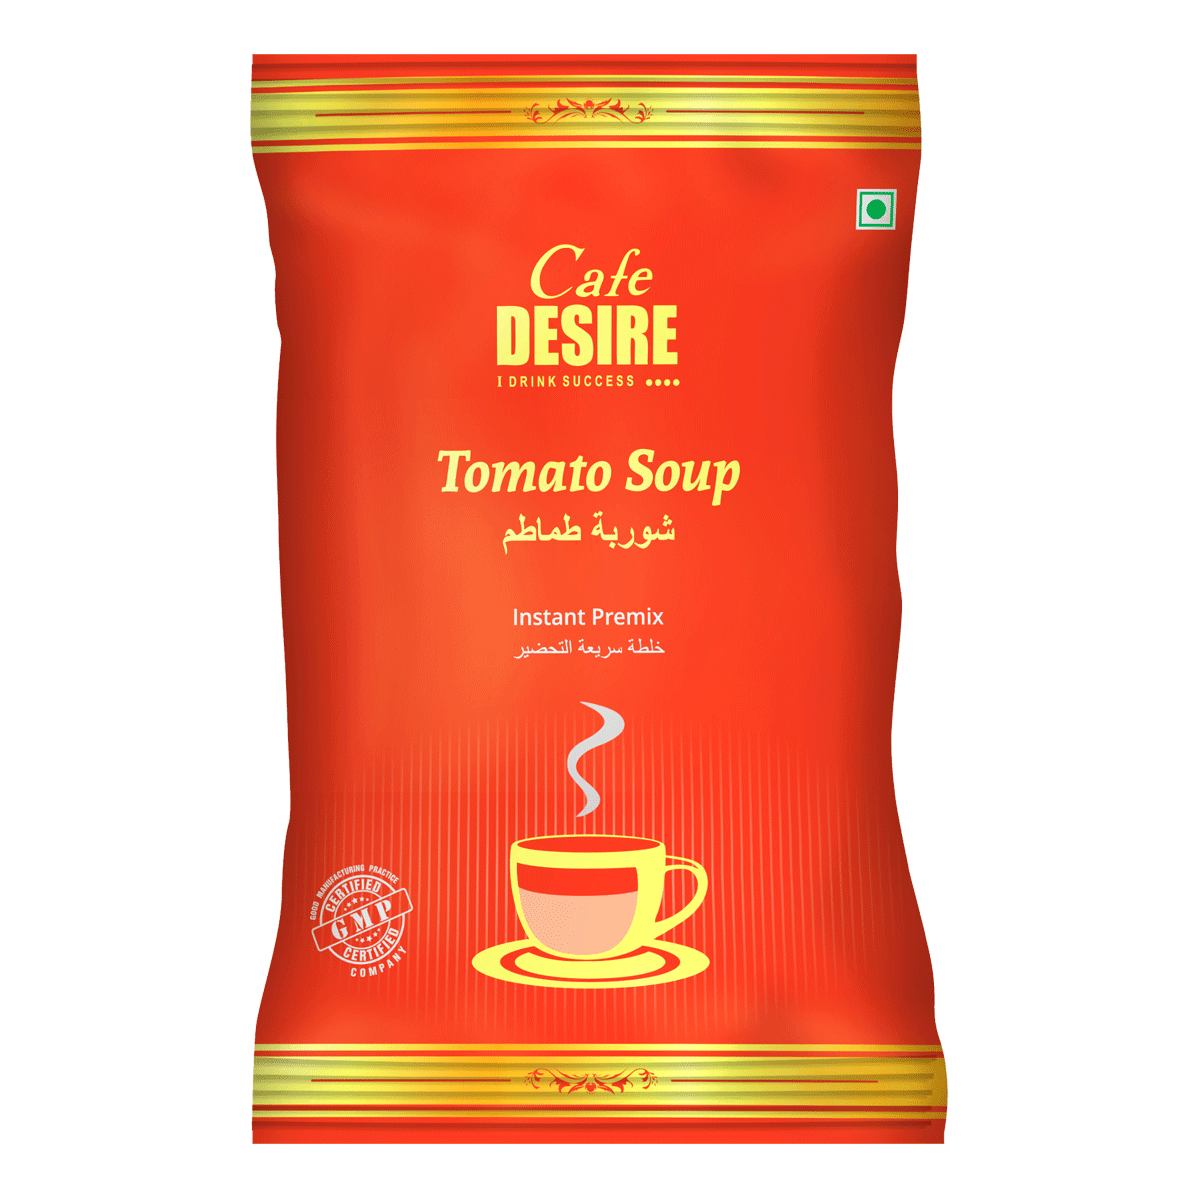 Tomato Soup Premix (500g) | Makes 40 Cups | Rich Taste as Home-Made | Mixture of Aromatic Herbs & Spices | For Manual Use - Just add Hot Water | Suitable for all Vending Machines - Cafe Desire Cafe Desire My Cafe Desire Tomato Soup Premix (500g) | Makes 40 Cups | Rich Taste as Home-Made | Mixture of Aromatic Herbs & Spices | For Manual Use - Just add Hot Water | Suitable for all Vending Machines